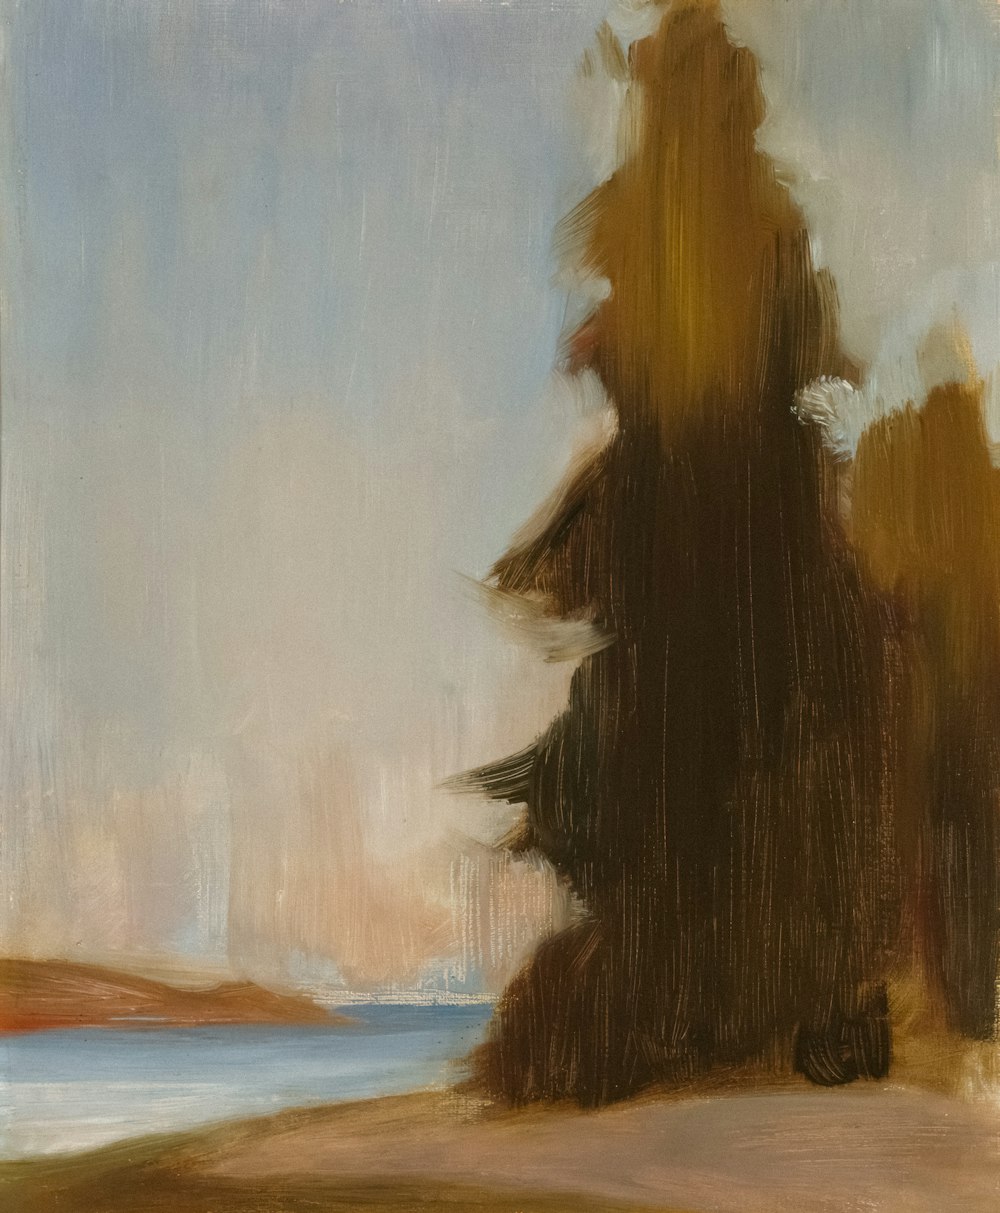 a painting of a tree with a body of water in the background